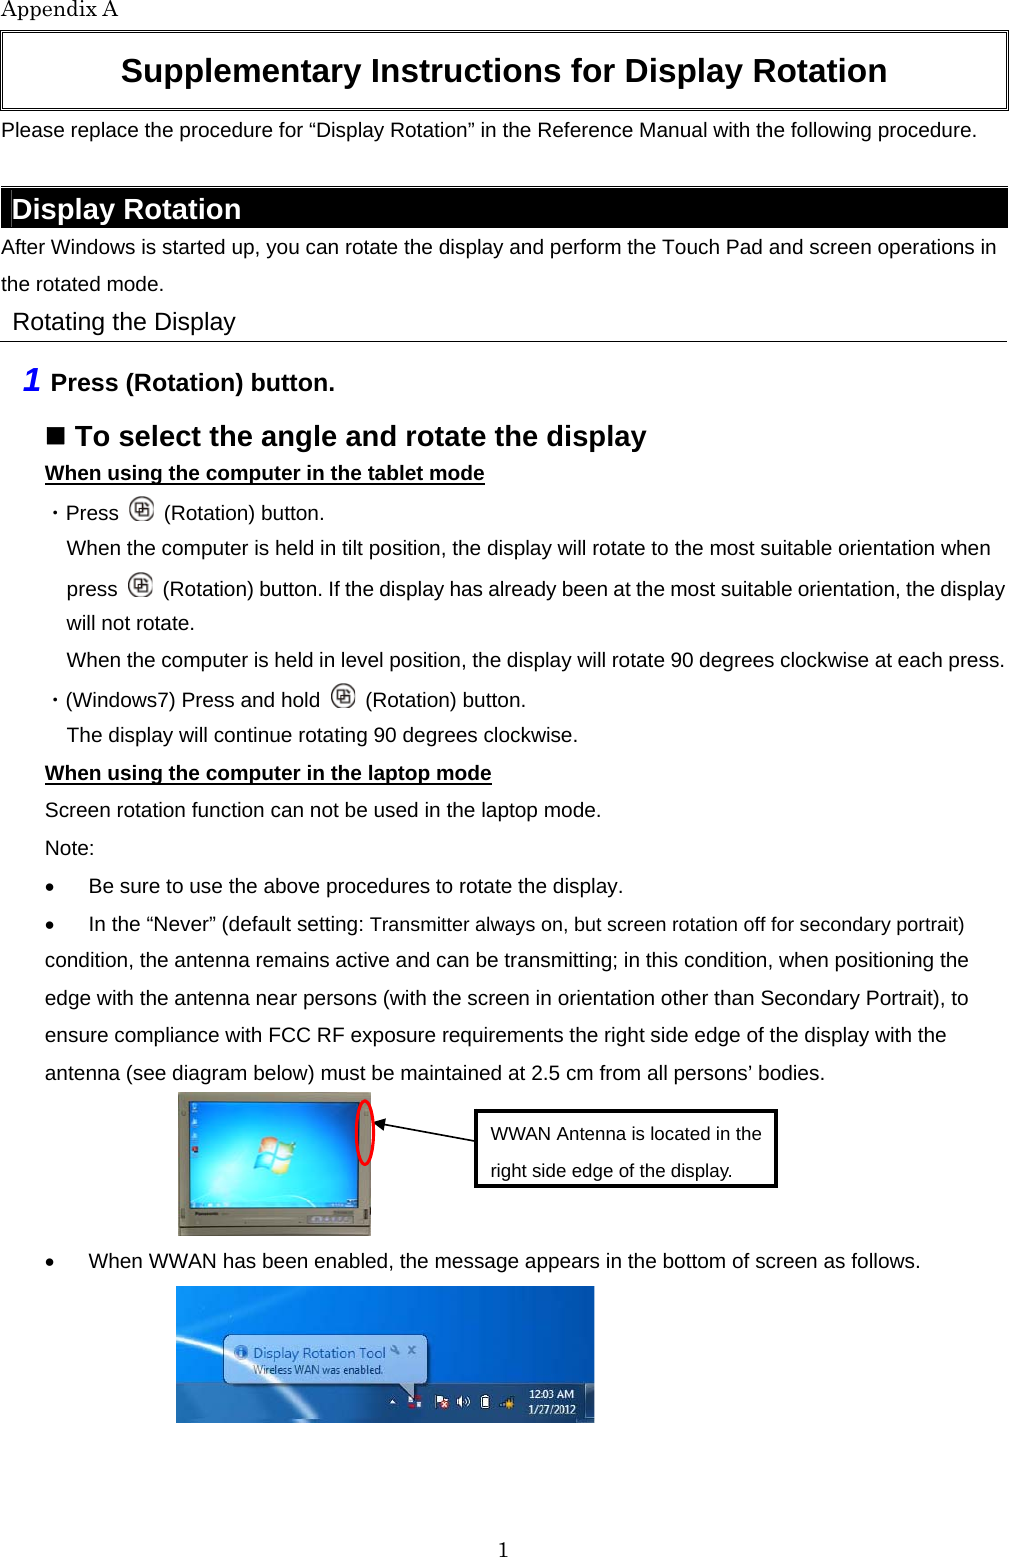 Appendix A 1 Supplementary Instructions for Display Rotation Please replace the procedure for “Display Rotation” in the Reference Manual with the following procedure.  Display Rotation After Windows is started up, you can rotate the display and perform the Touch Pad and screen operations in the rotated mode. Rotating the Display 1 Press (Rotation) button.  To select the angle and rotate the display When using the computer in the tablet mode ・Press   (Rotation) button. When the computer is held in tilt position, the display will rotate to the most suitable orientation when press    (Rotation) button. If the display has already been at the most suitable orientation, the display will not rotate. When the computer is held in level position, the display will rotate 90 degrees clockwise at each press. ・(Windows7) Press and hold   (Rotation) button. The display will continue rotating 90 degrees clockwise. When using the computer in the laptop mode Screen rotation function can not be used in the laptop mode. Note:   Be sure to use the above procedures to rotate the display.   In the “Never” (default setting: Transmitter always on, but screen rotation off for secondary portrait) condition, the antenna remains active and can be transmitting; in this condition, when positioning the edge with the antenna near persons (with the screen in orientation other than Secondary Portrait), to ensure compliance with FCC RF exposure requirements the right side edge of the display with the antenna (see diagram below) must be maintained at 2.5 cm from all persons’ bodies.      When WWAN has been enabled, the message appears in the bottom of screen as follows.      WWAN Antenna is located in the right side edge of the display. 